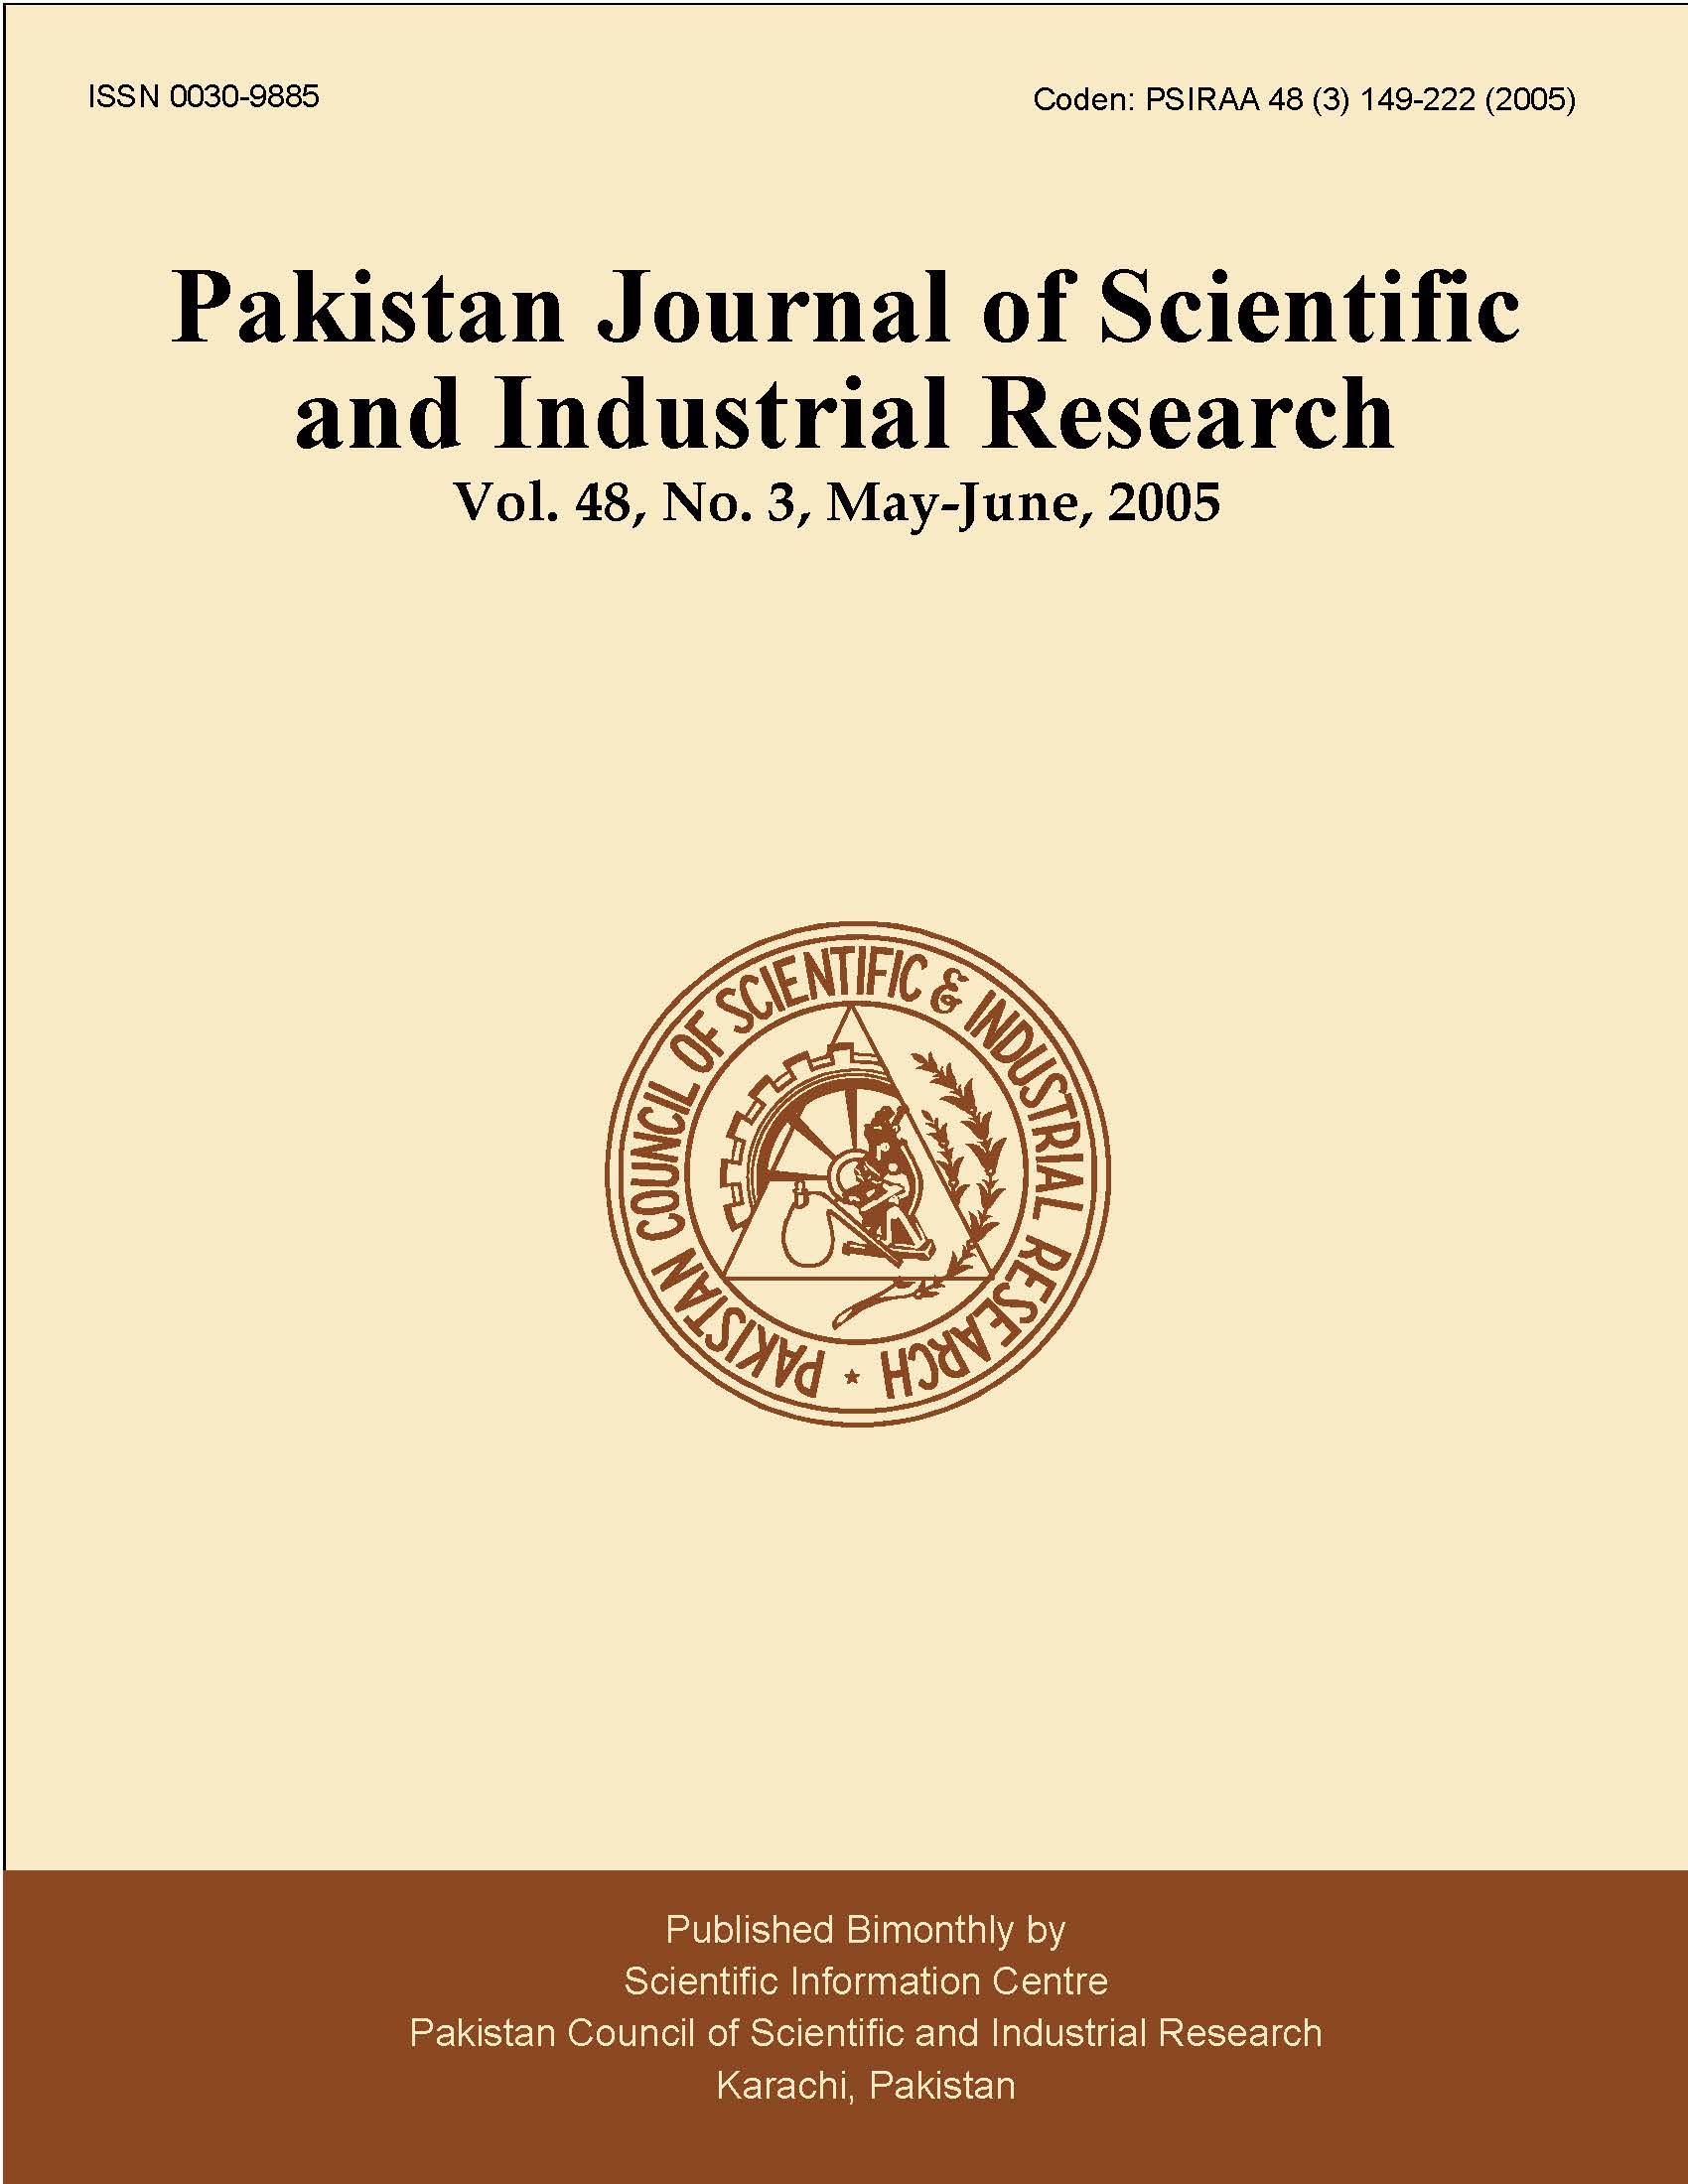 					View Vol. 48 No. 3 (2005): Pakistan Journal of Scientific and Industrial Research
				